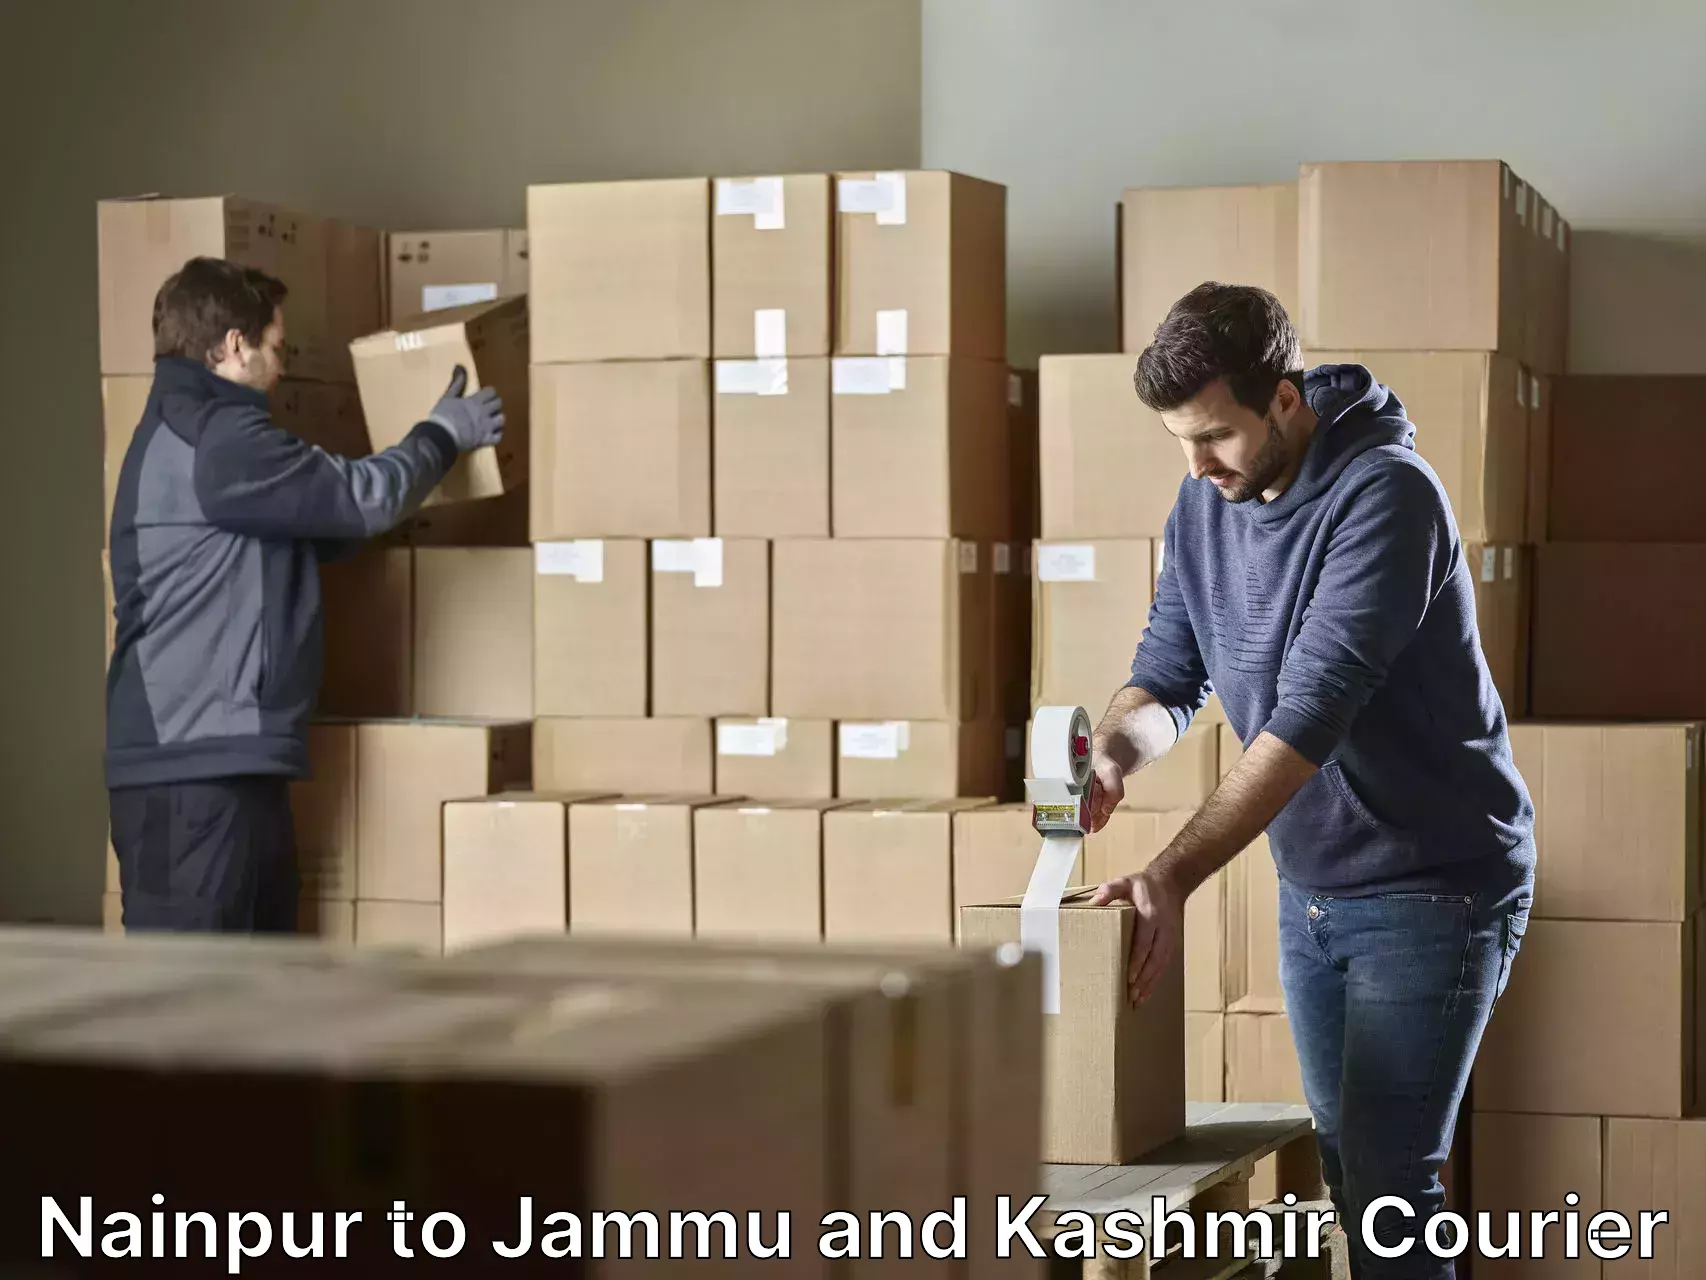 Furniture delivery service Nainpur to Jammu and Kashmir